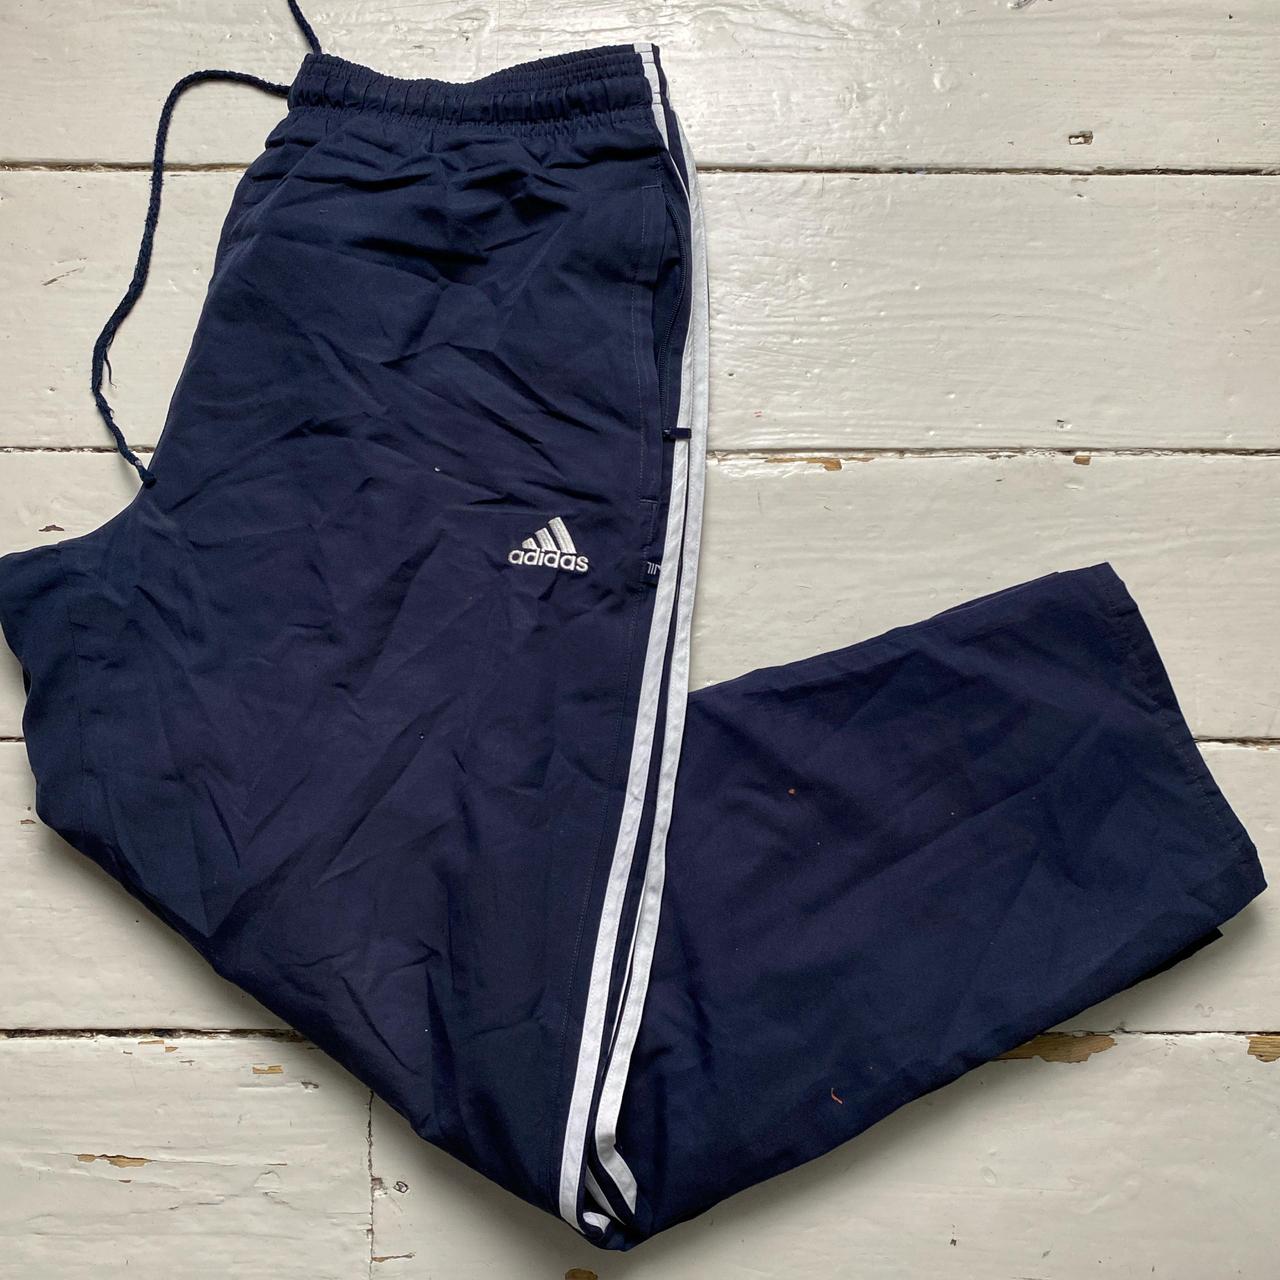 Adidas Navy and White Stripe Shell Baggy Trackpant Bottoms